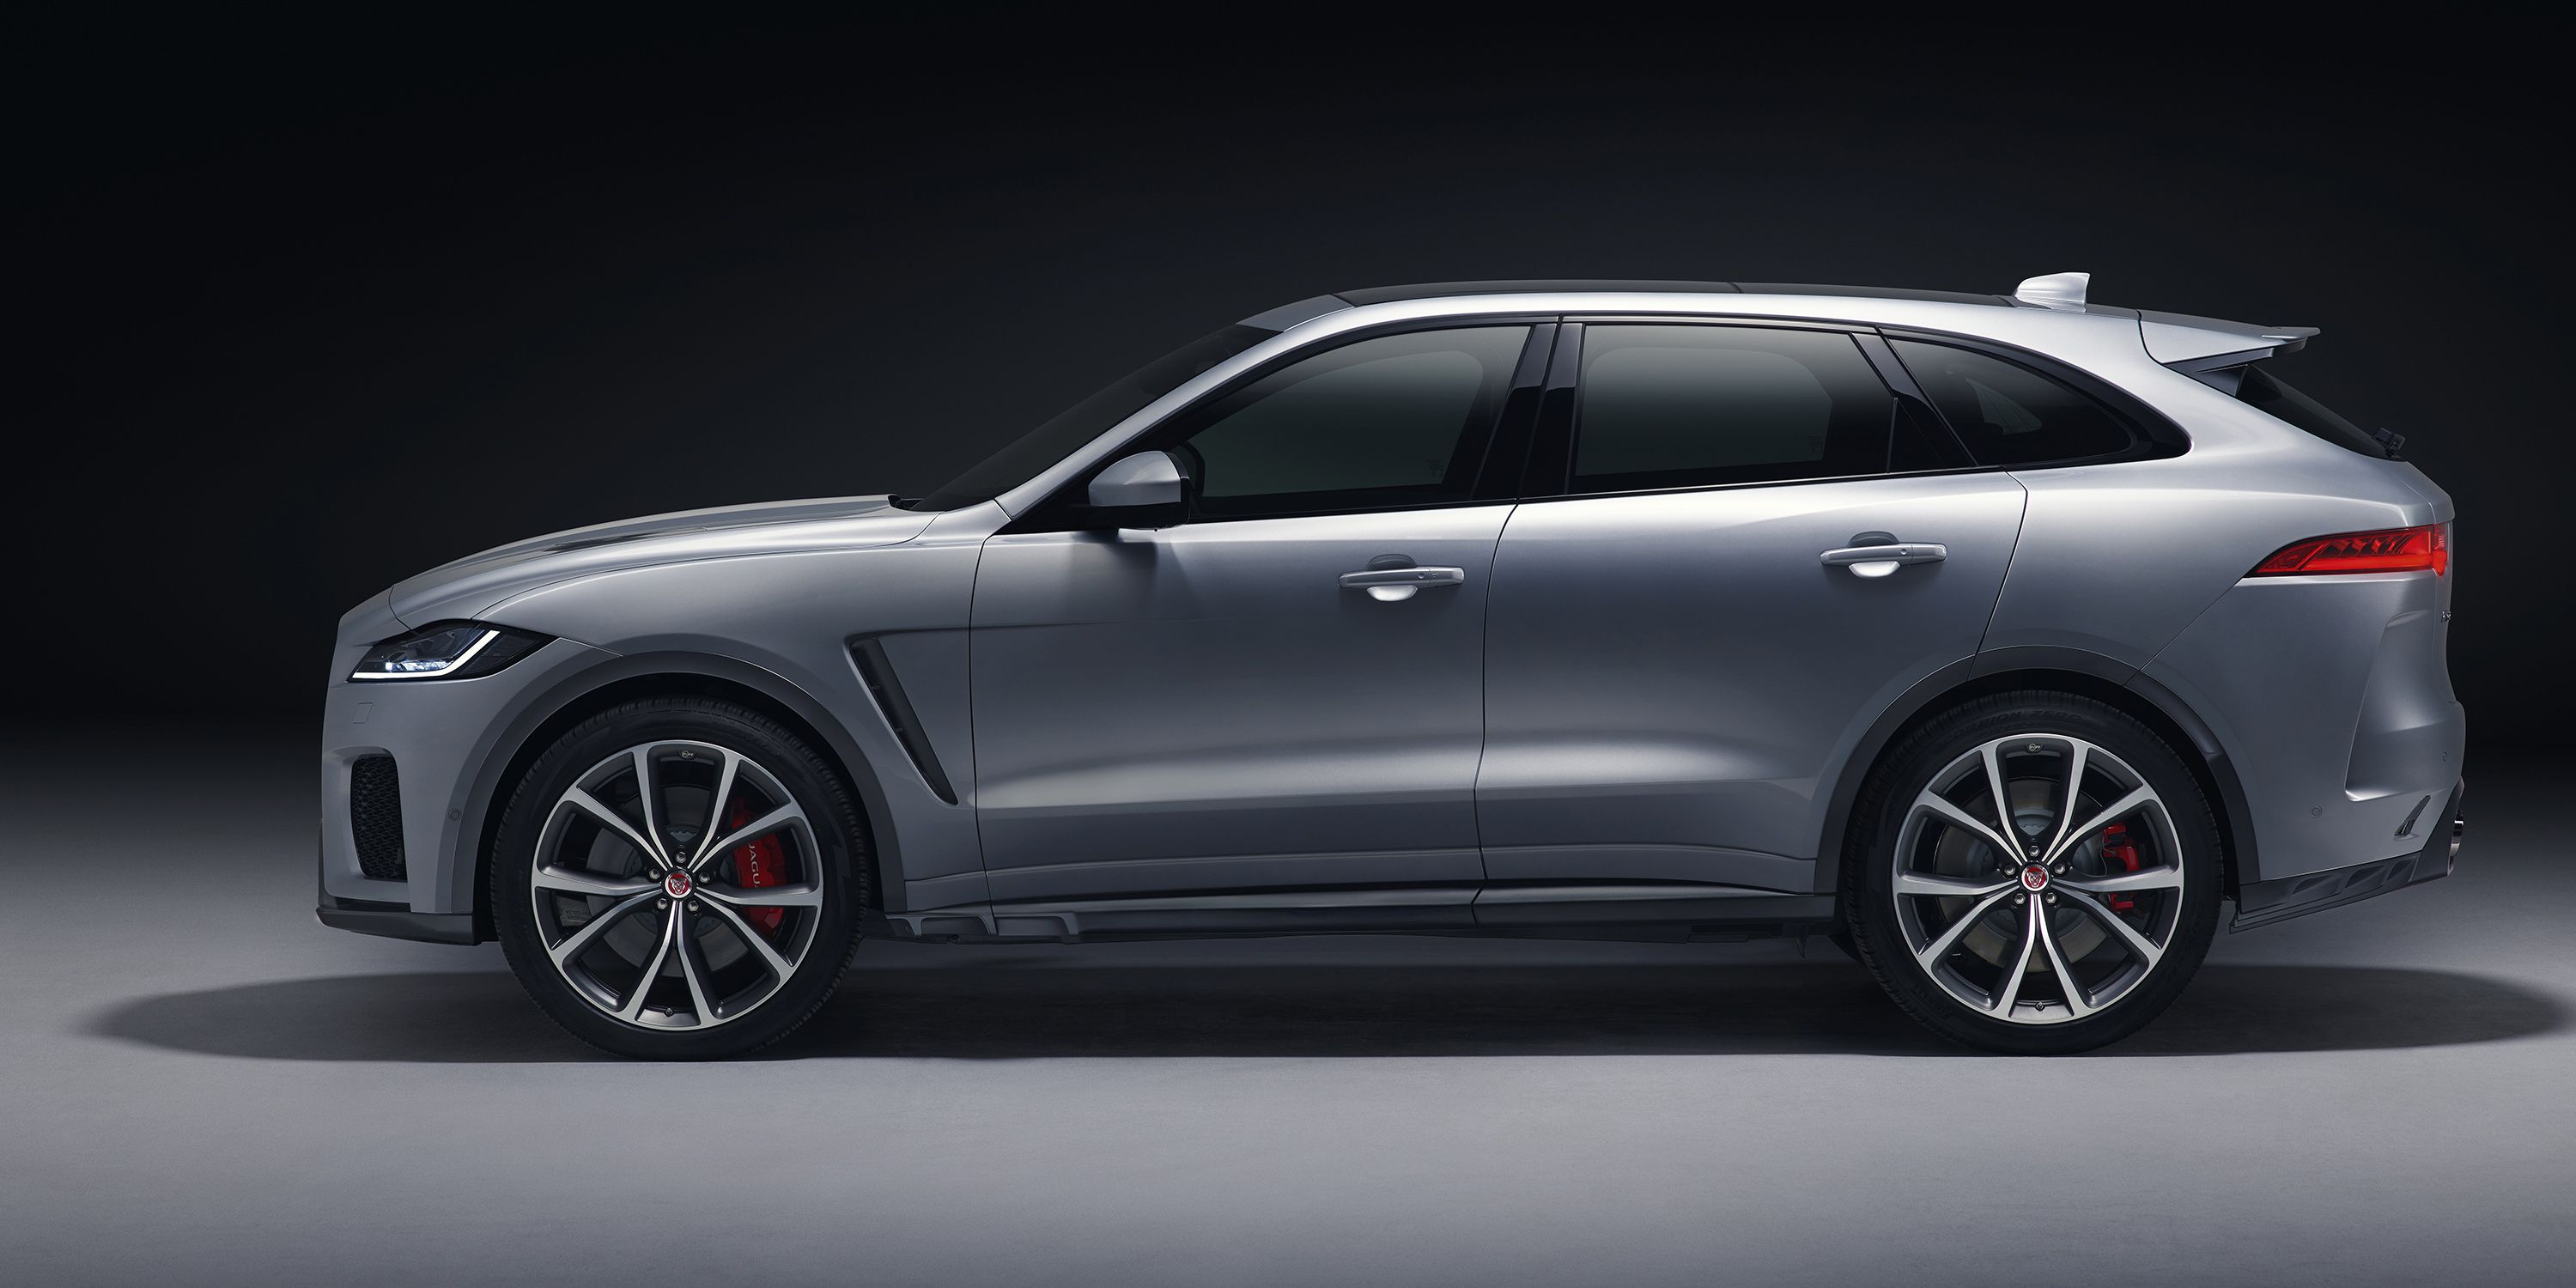 The 2019 Jaguar F-Pace SVR Is 550-HP of Supercharged English Absurdity